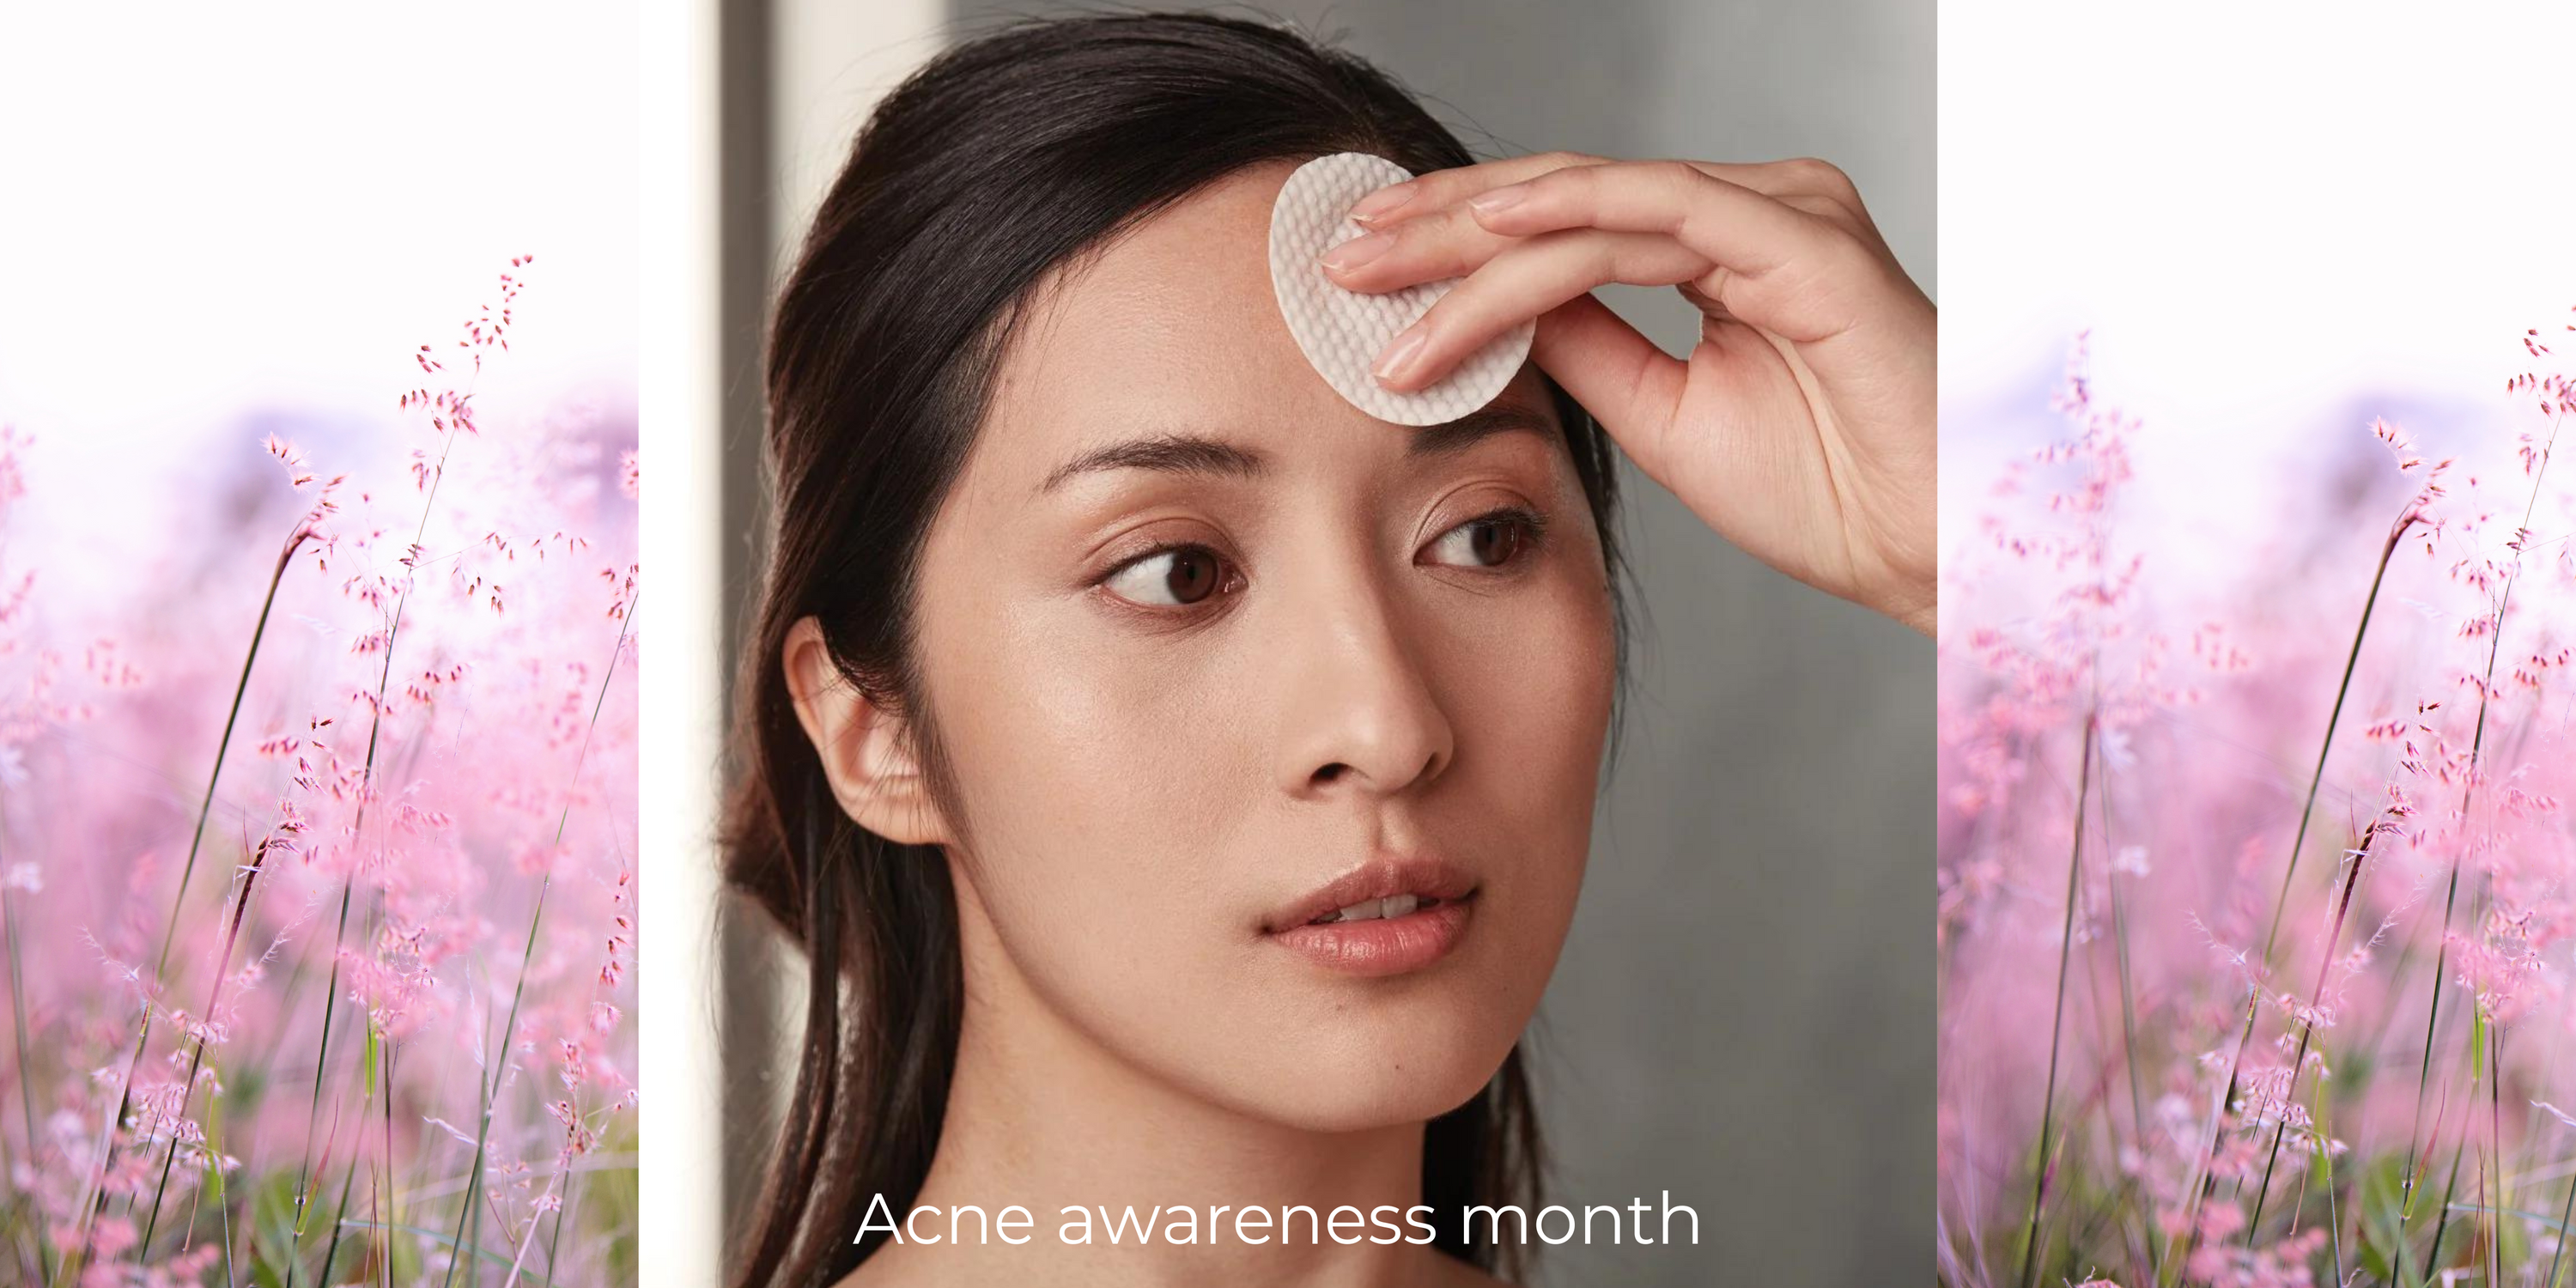 5 Ways to Celebrate Acne Awareness Month